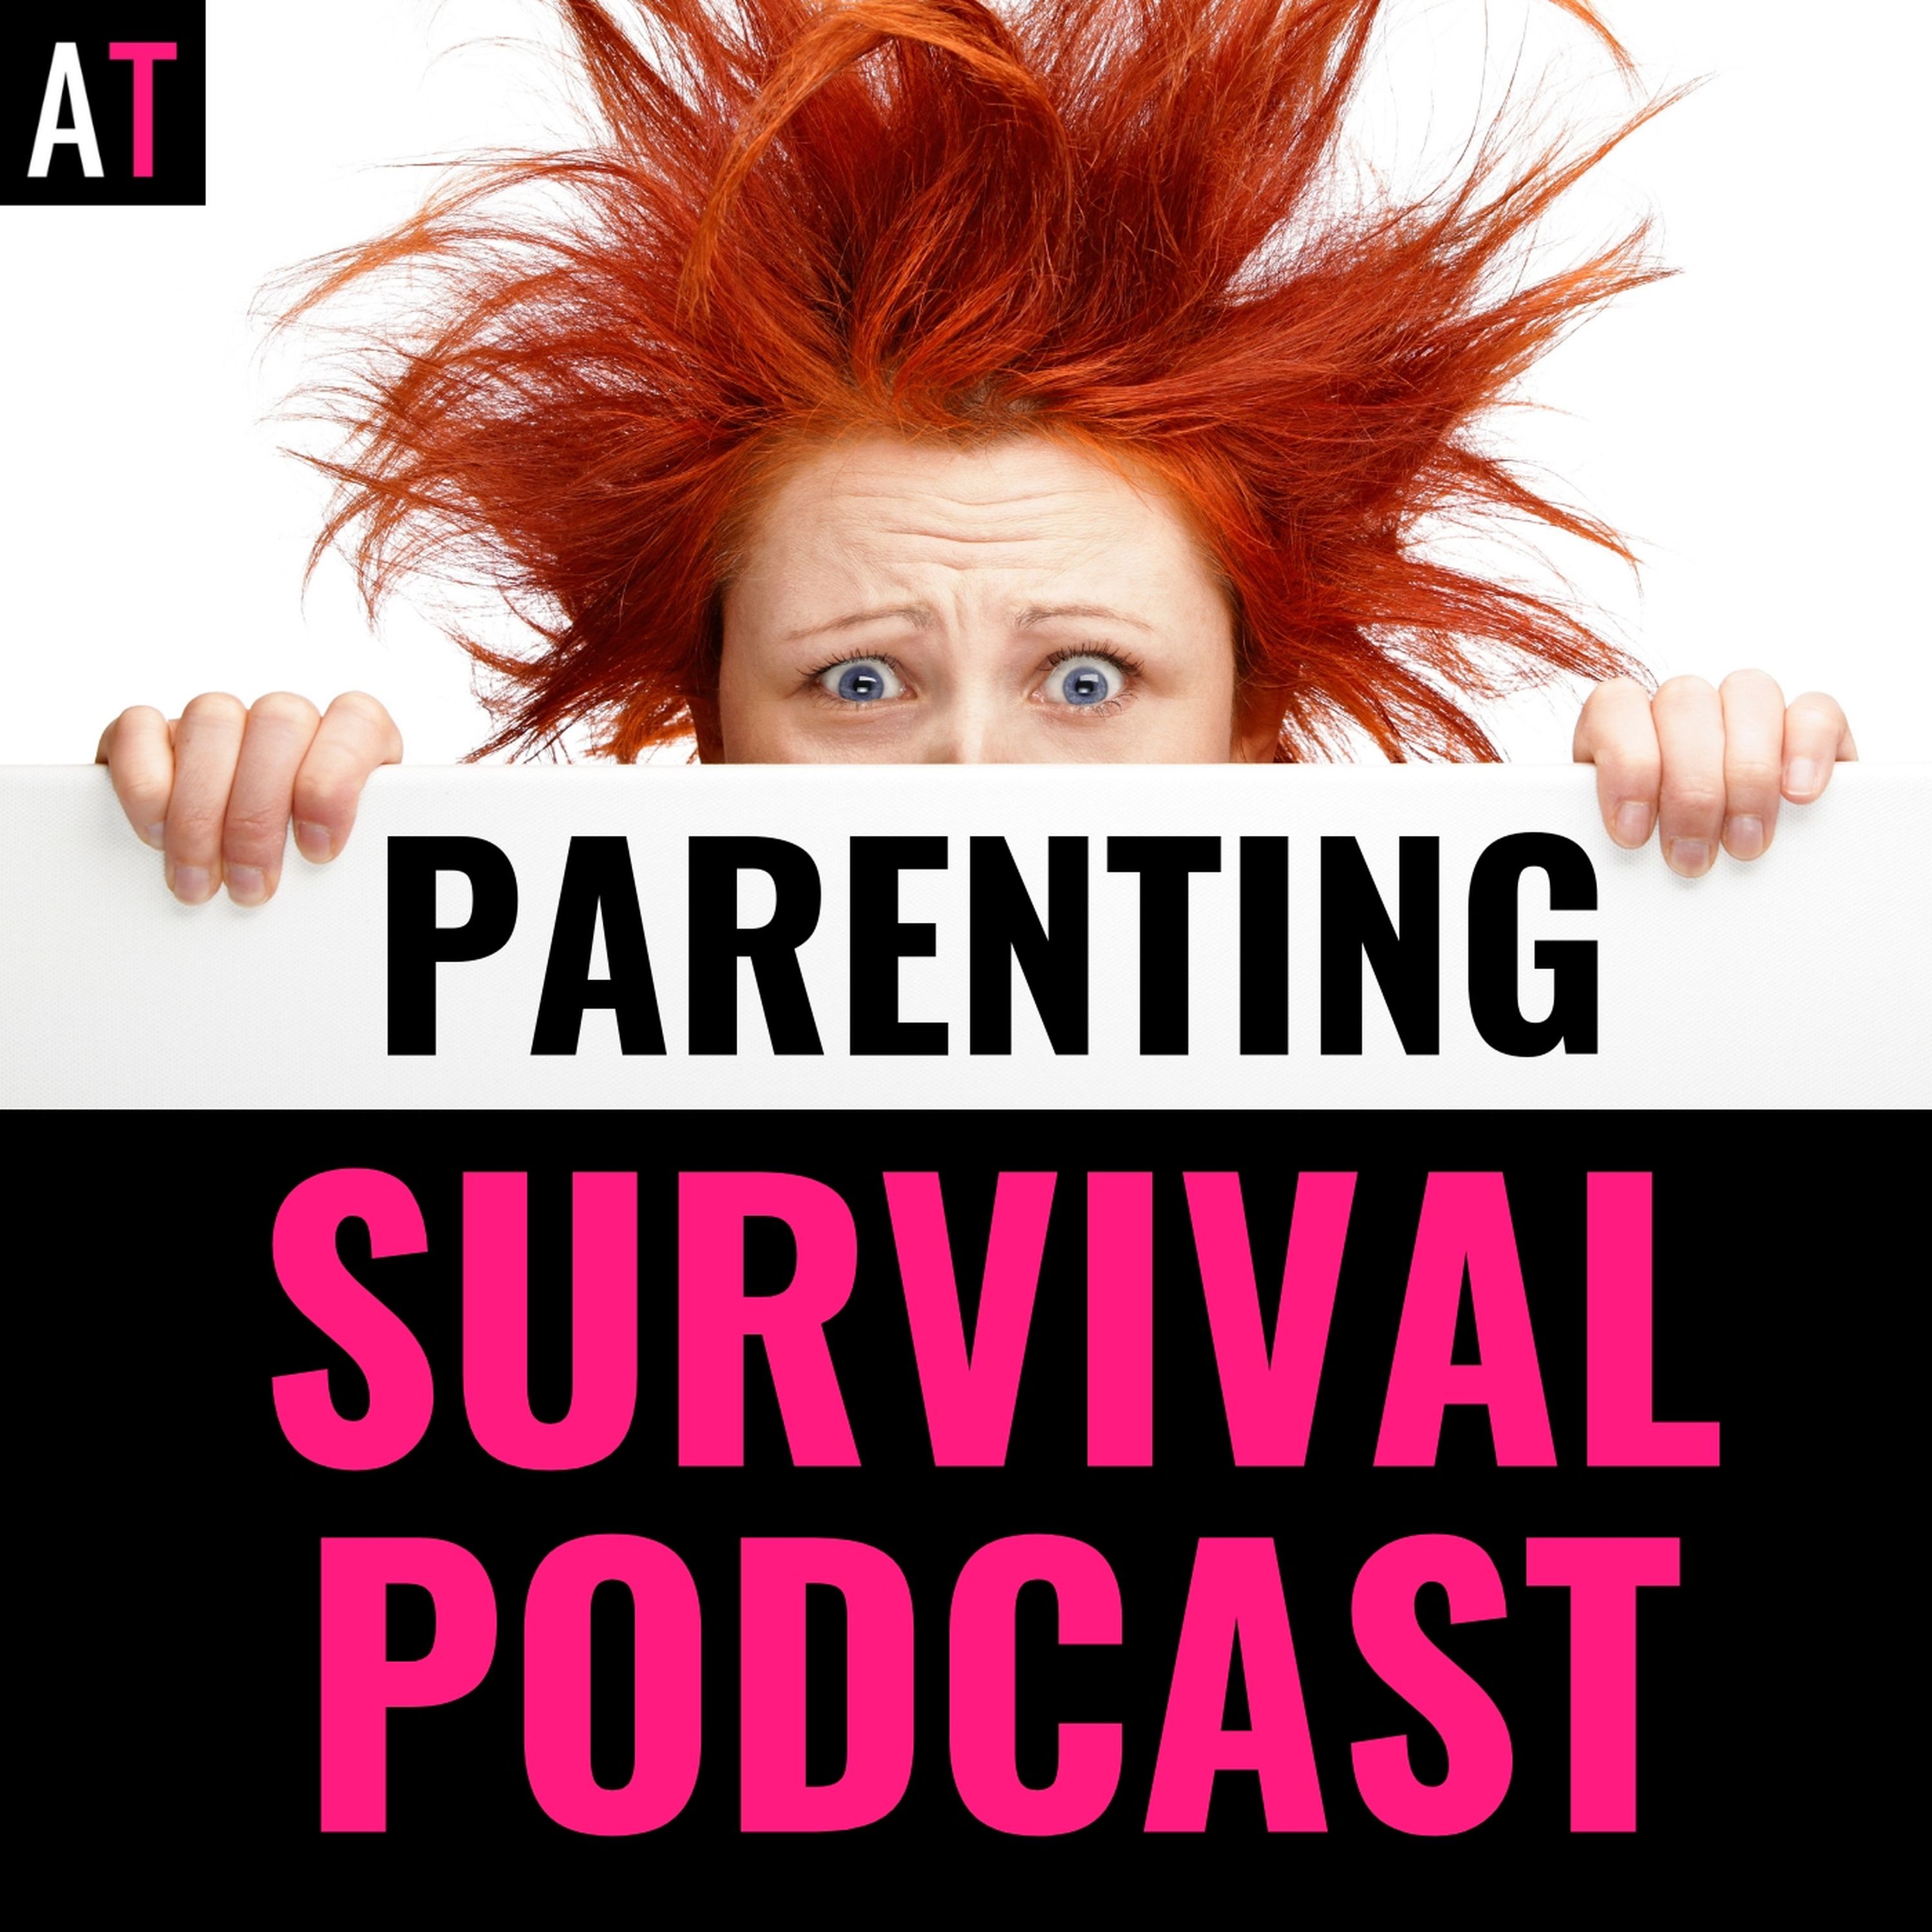 PSP 136: How to Talk to Your Child When Something Bad Happened Locally or Globally | Dawn Huebner